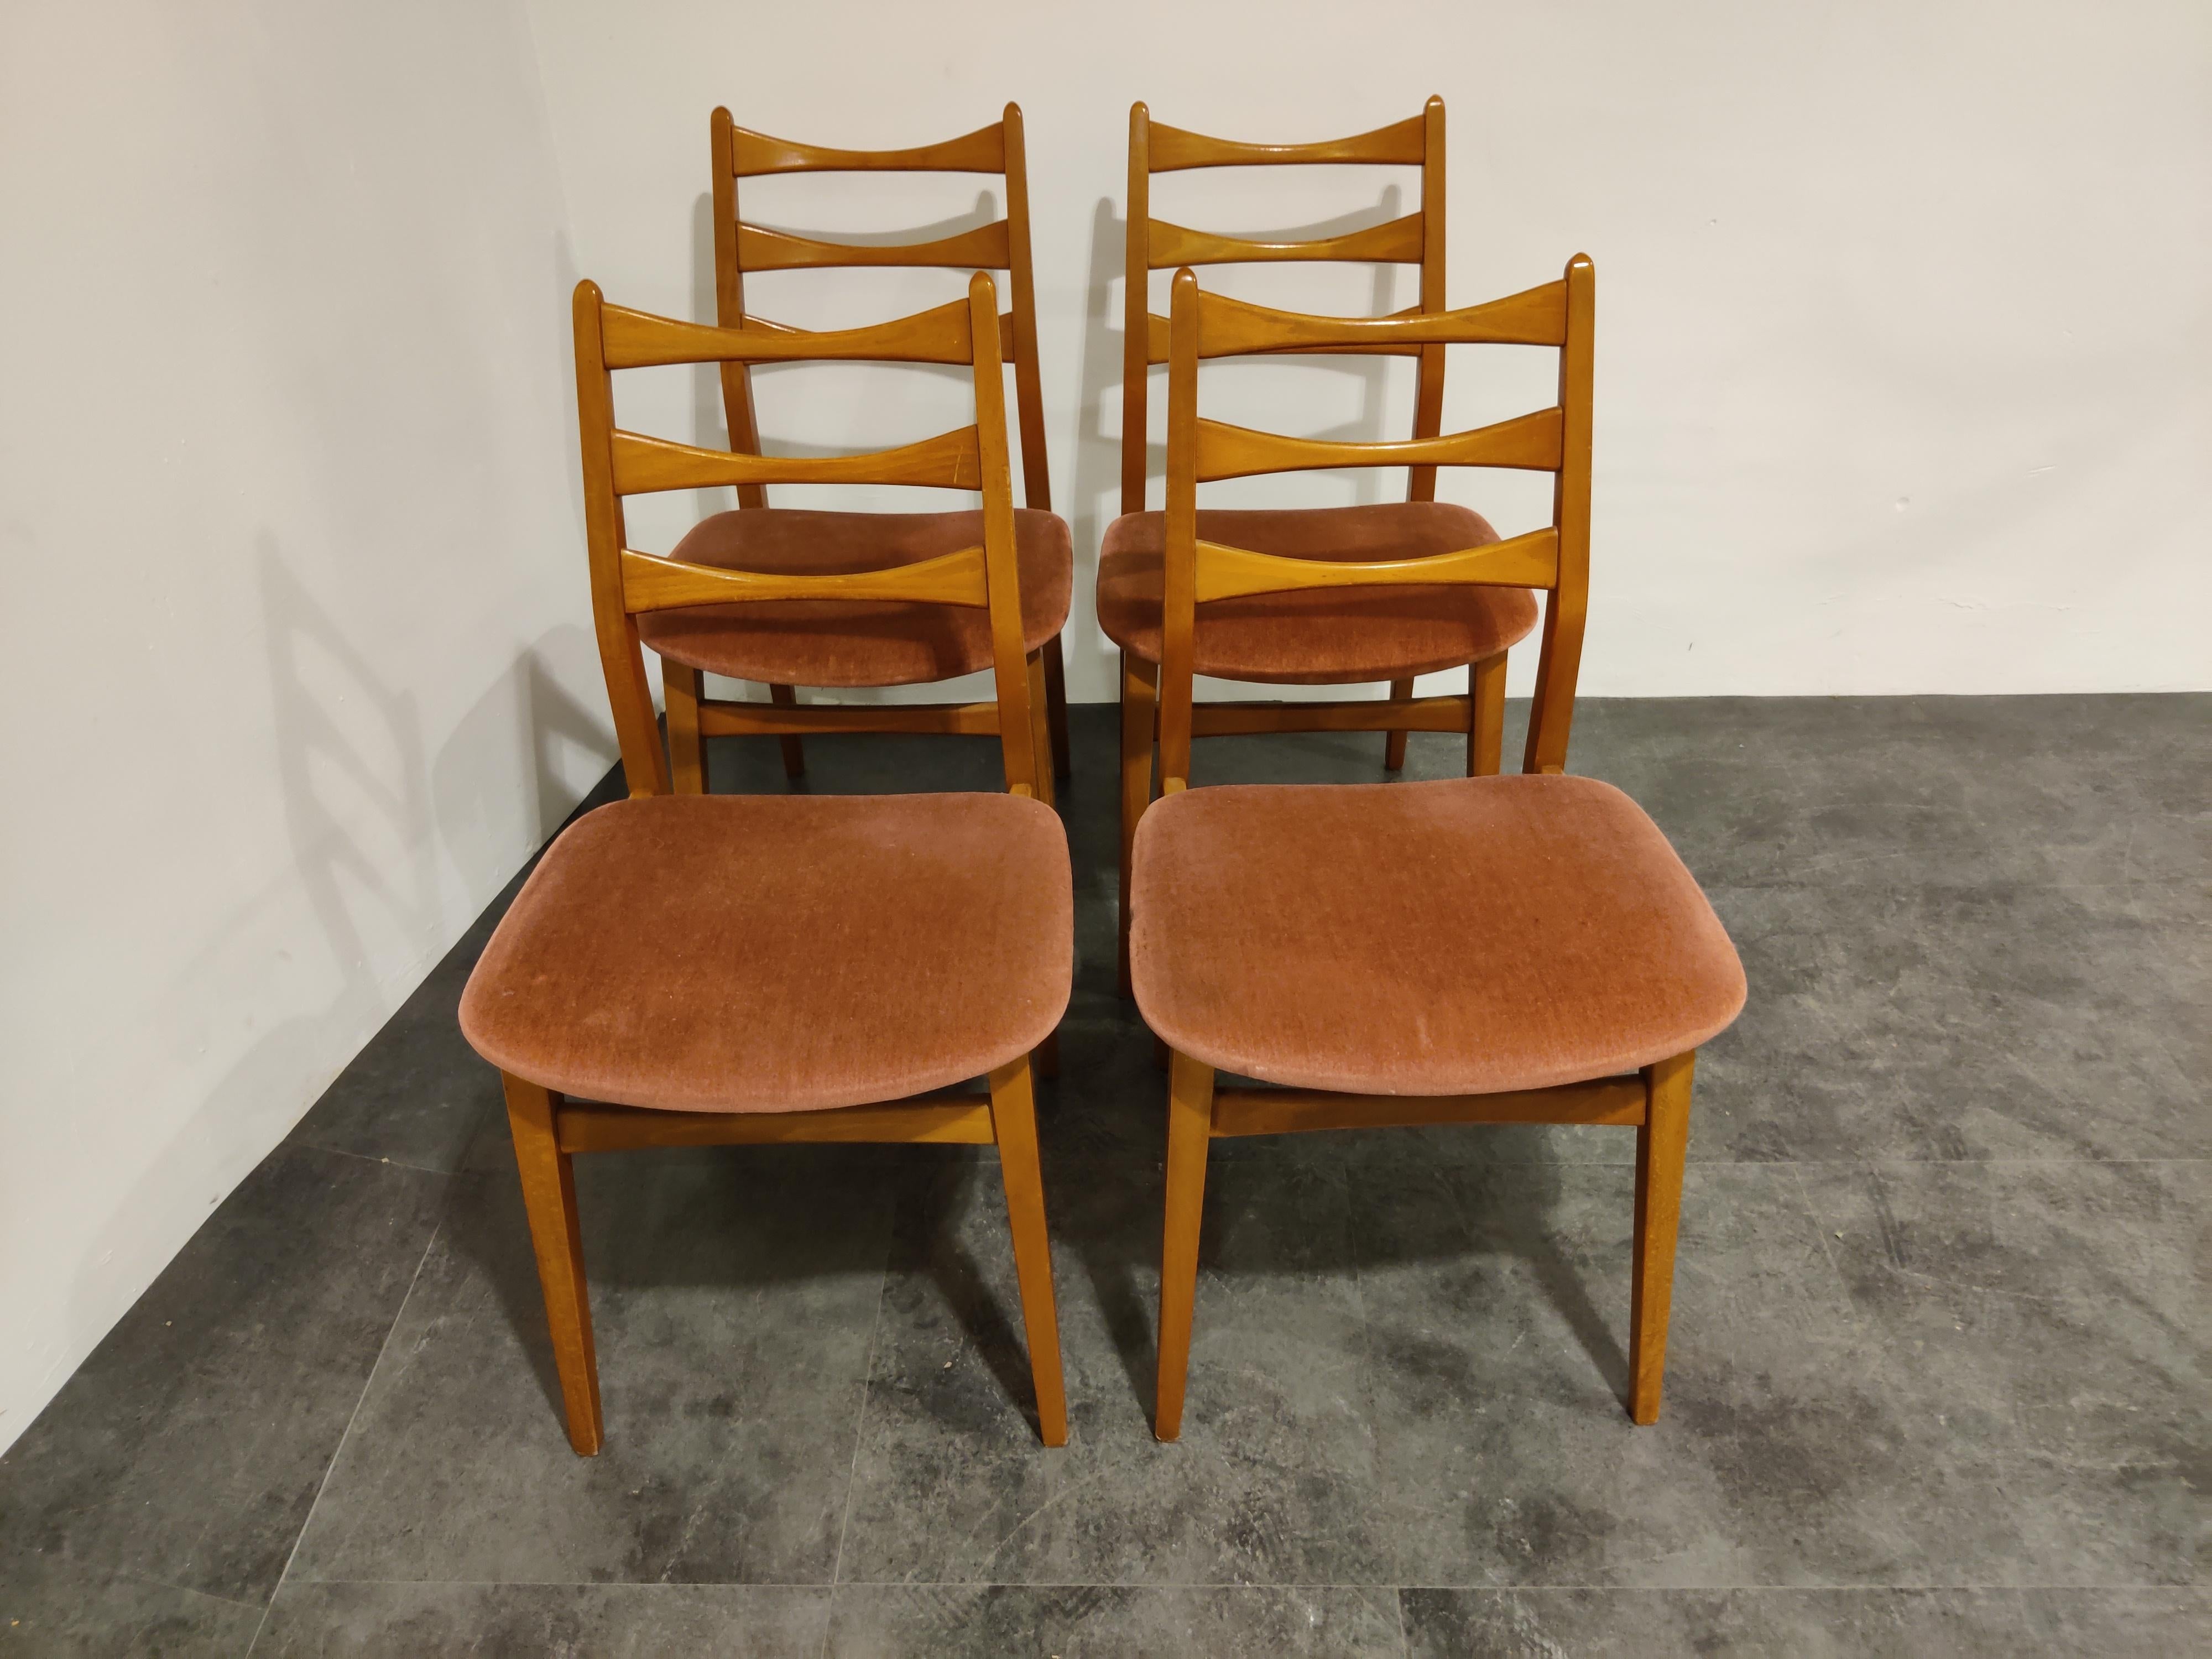 Midcentury teak wooden dining chairs with original fabric upholstery.

Good condition.

Labelled 'Mignon mobel'.

Nice and elegant design

1960s Germany

Measures: Height 87cm/34.25